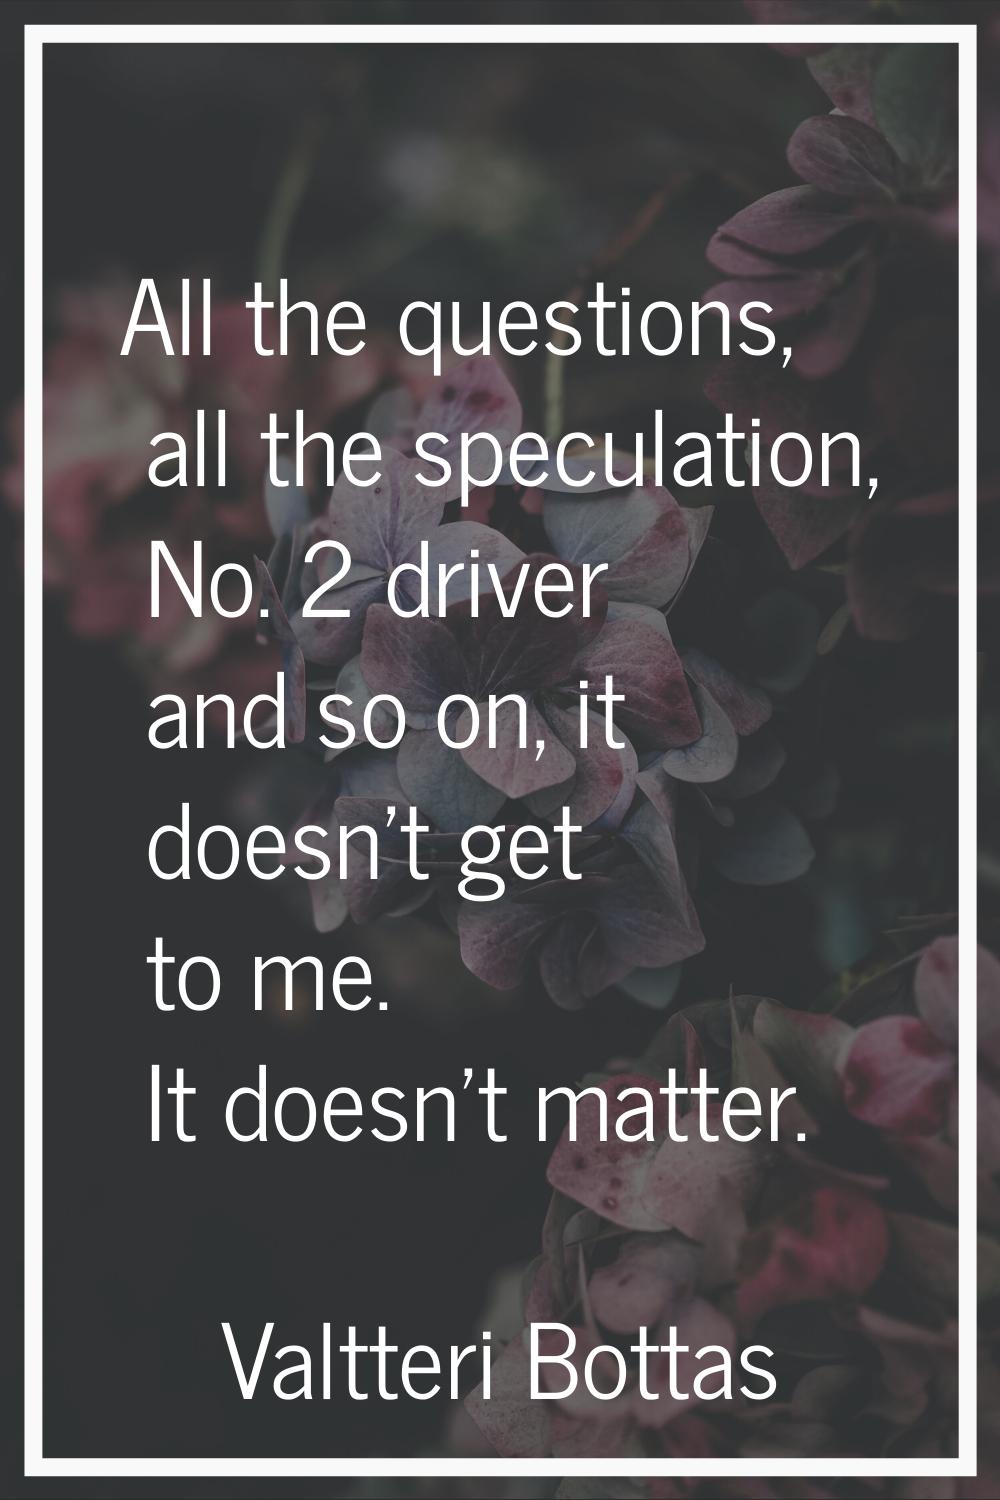 All the questions, all the speculation, No. 2 driver and so on, it doesn't get to me. It doesn't ma